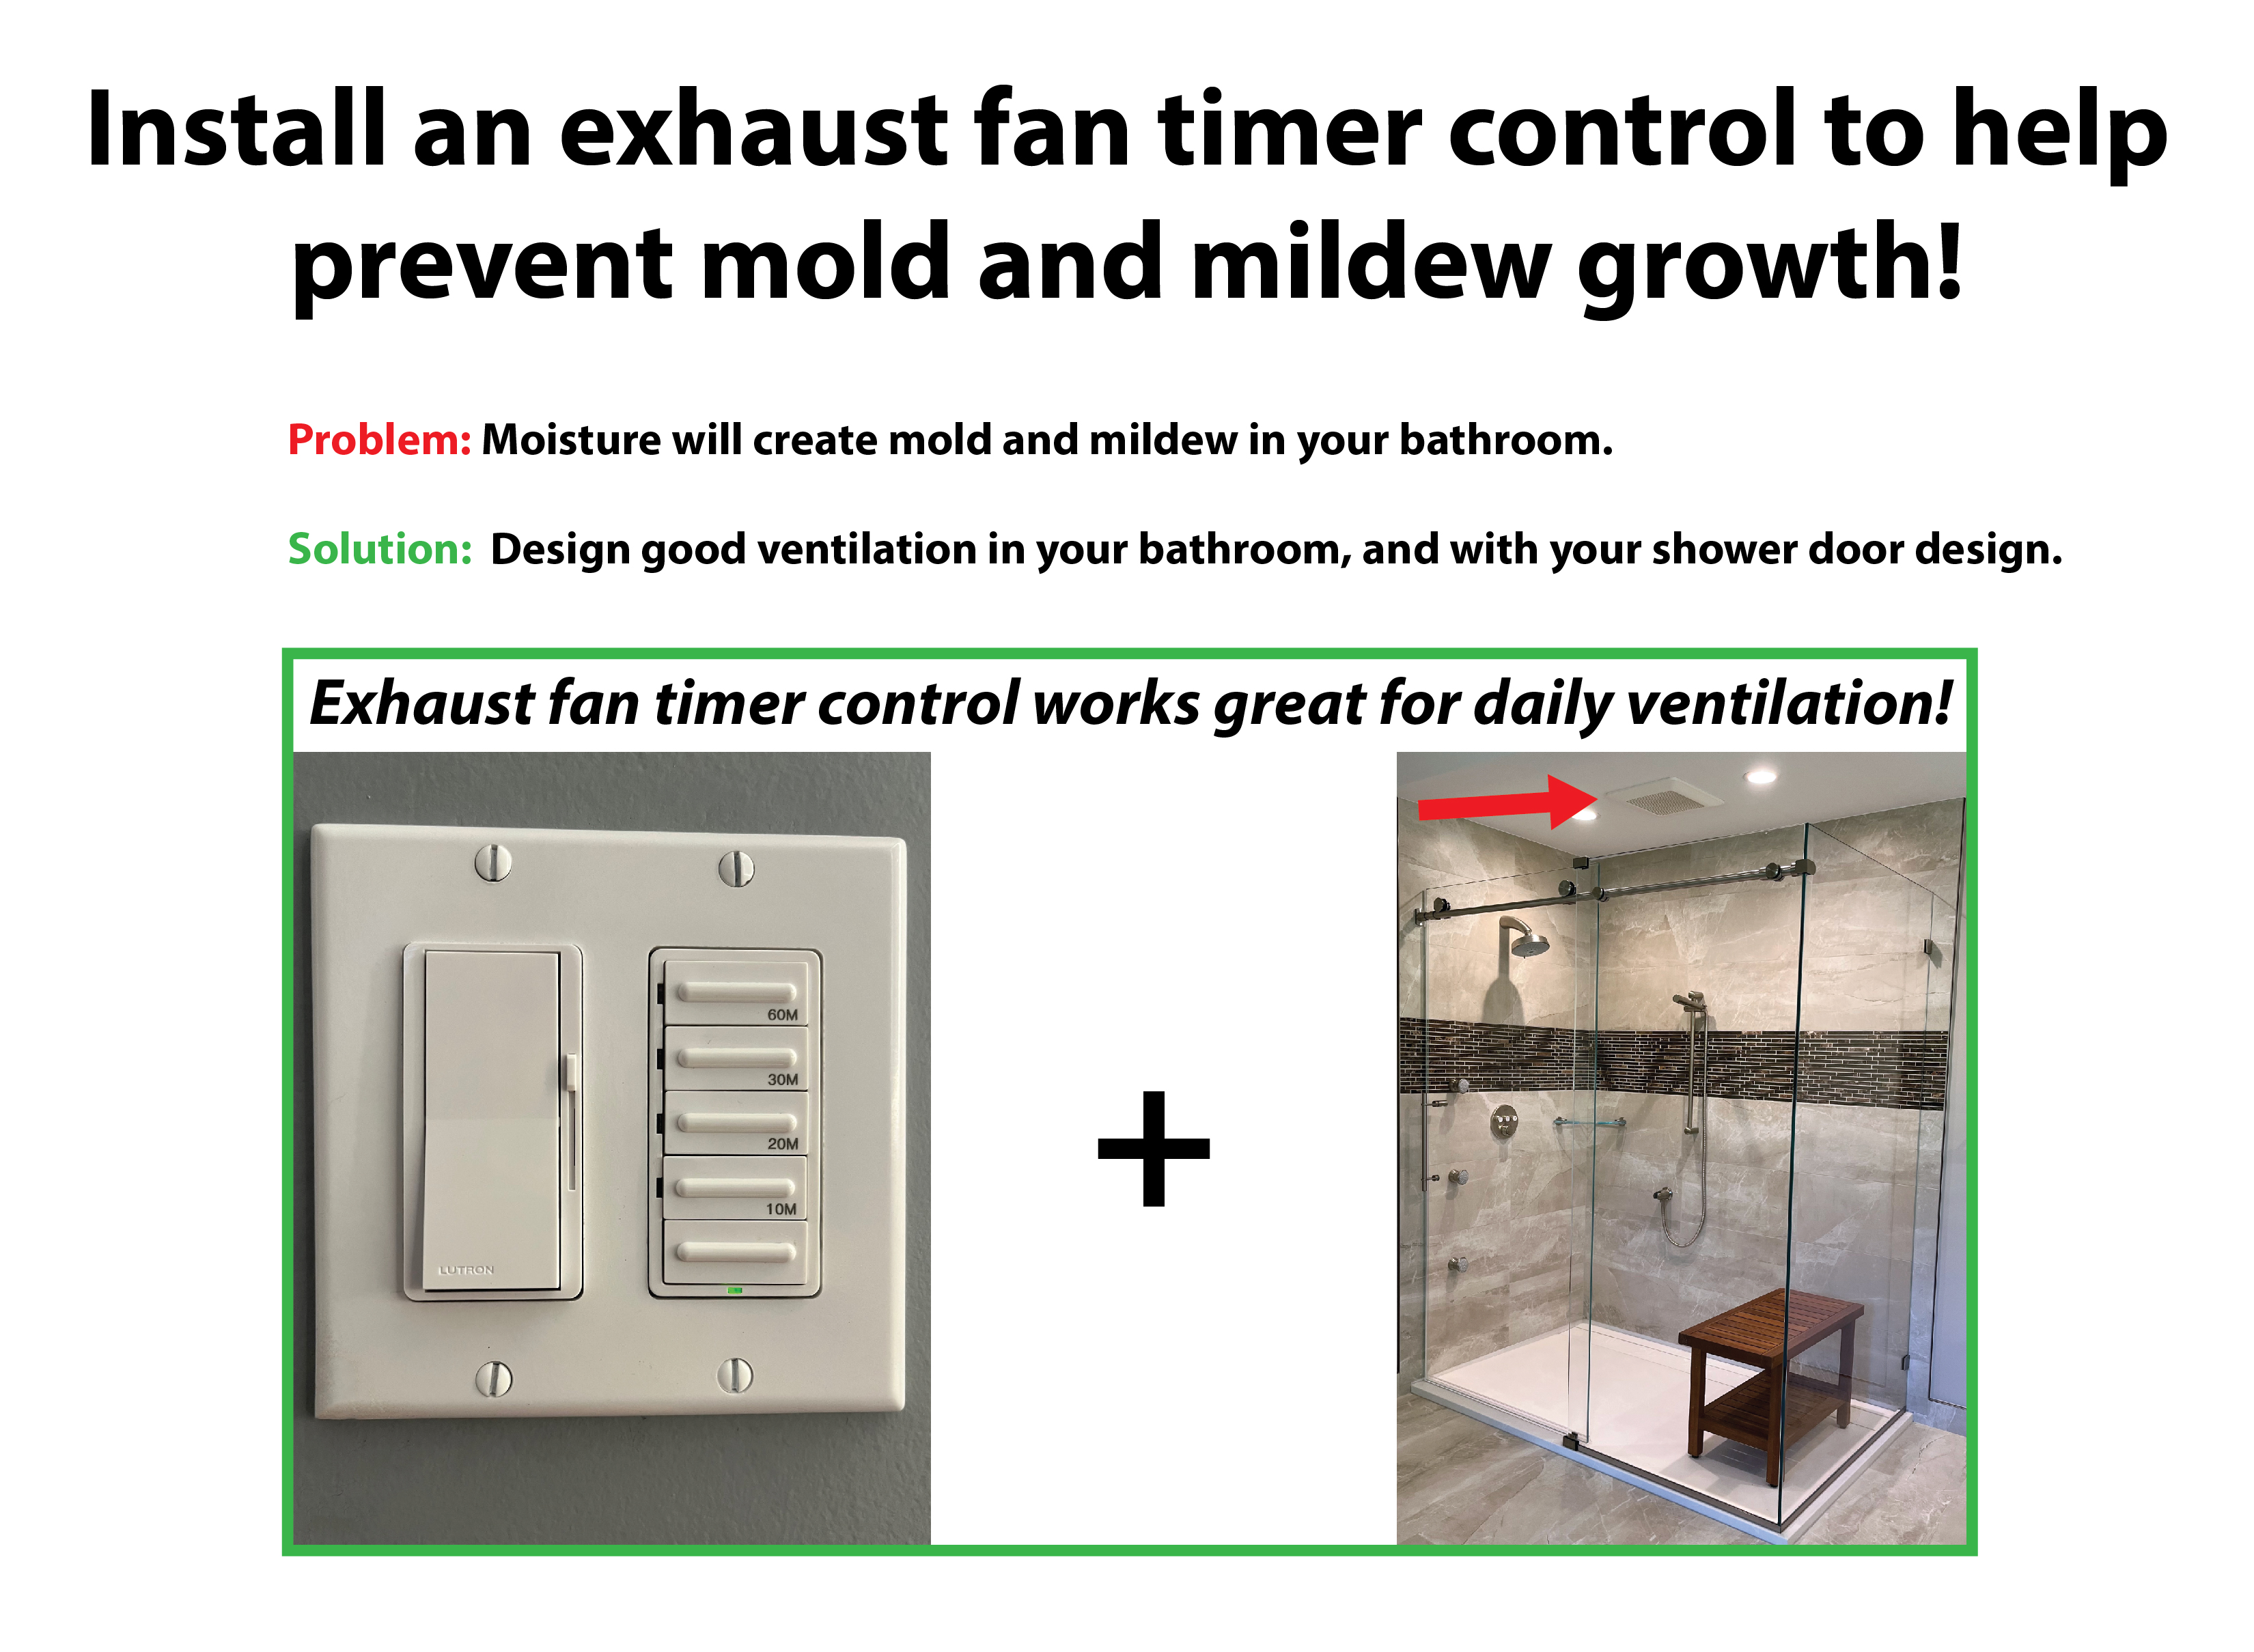 Install an exhaust fan timer control to help prevent mold and mildew growth!